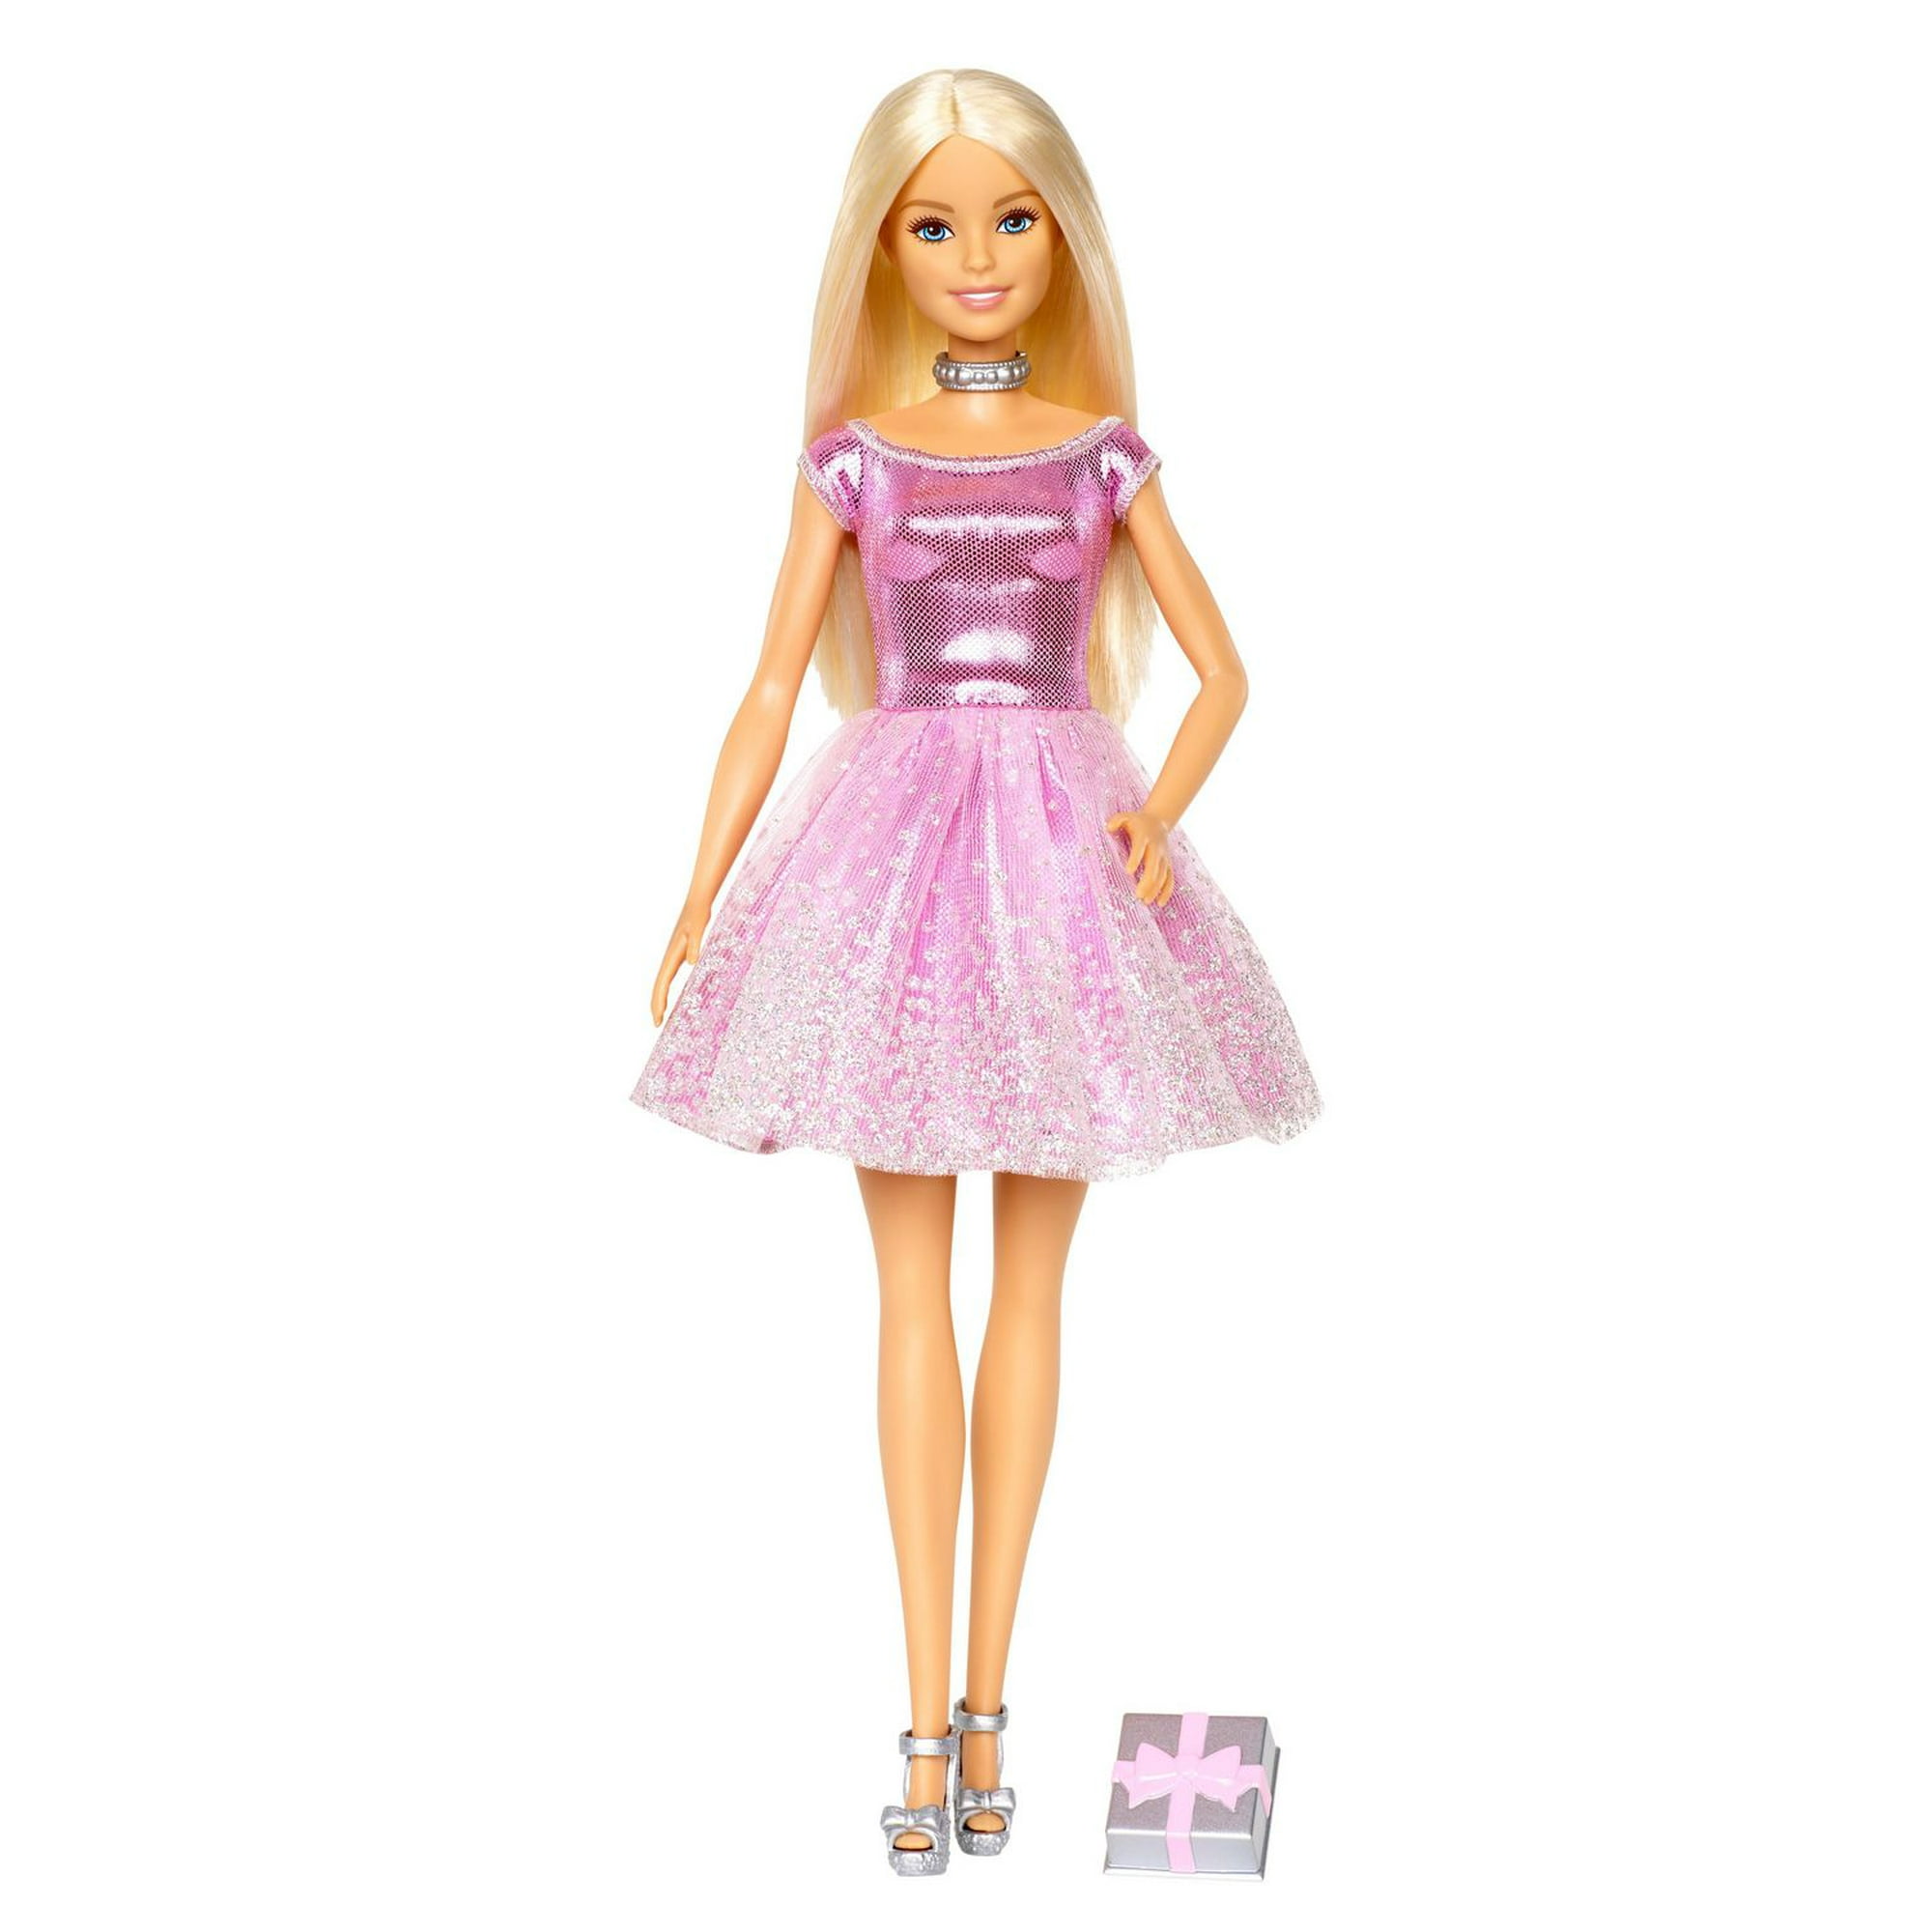 Barbie Doll (11.5 in Blonde) & Purple Convertible Car, 3 to 7 Year